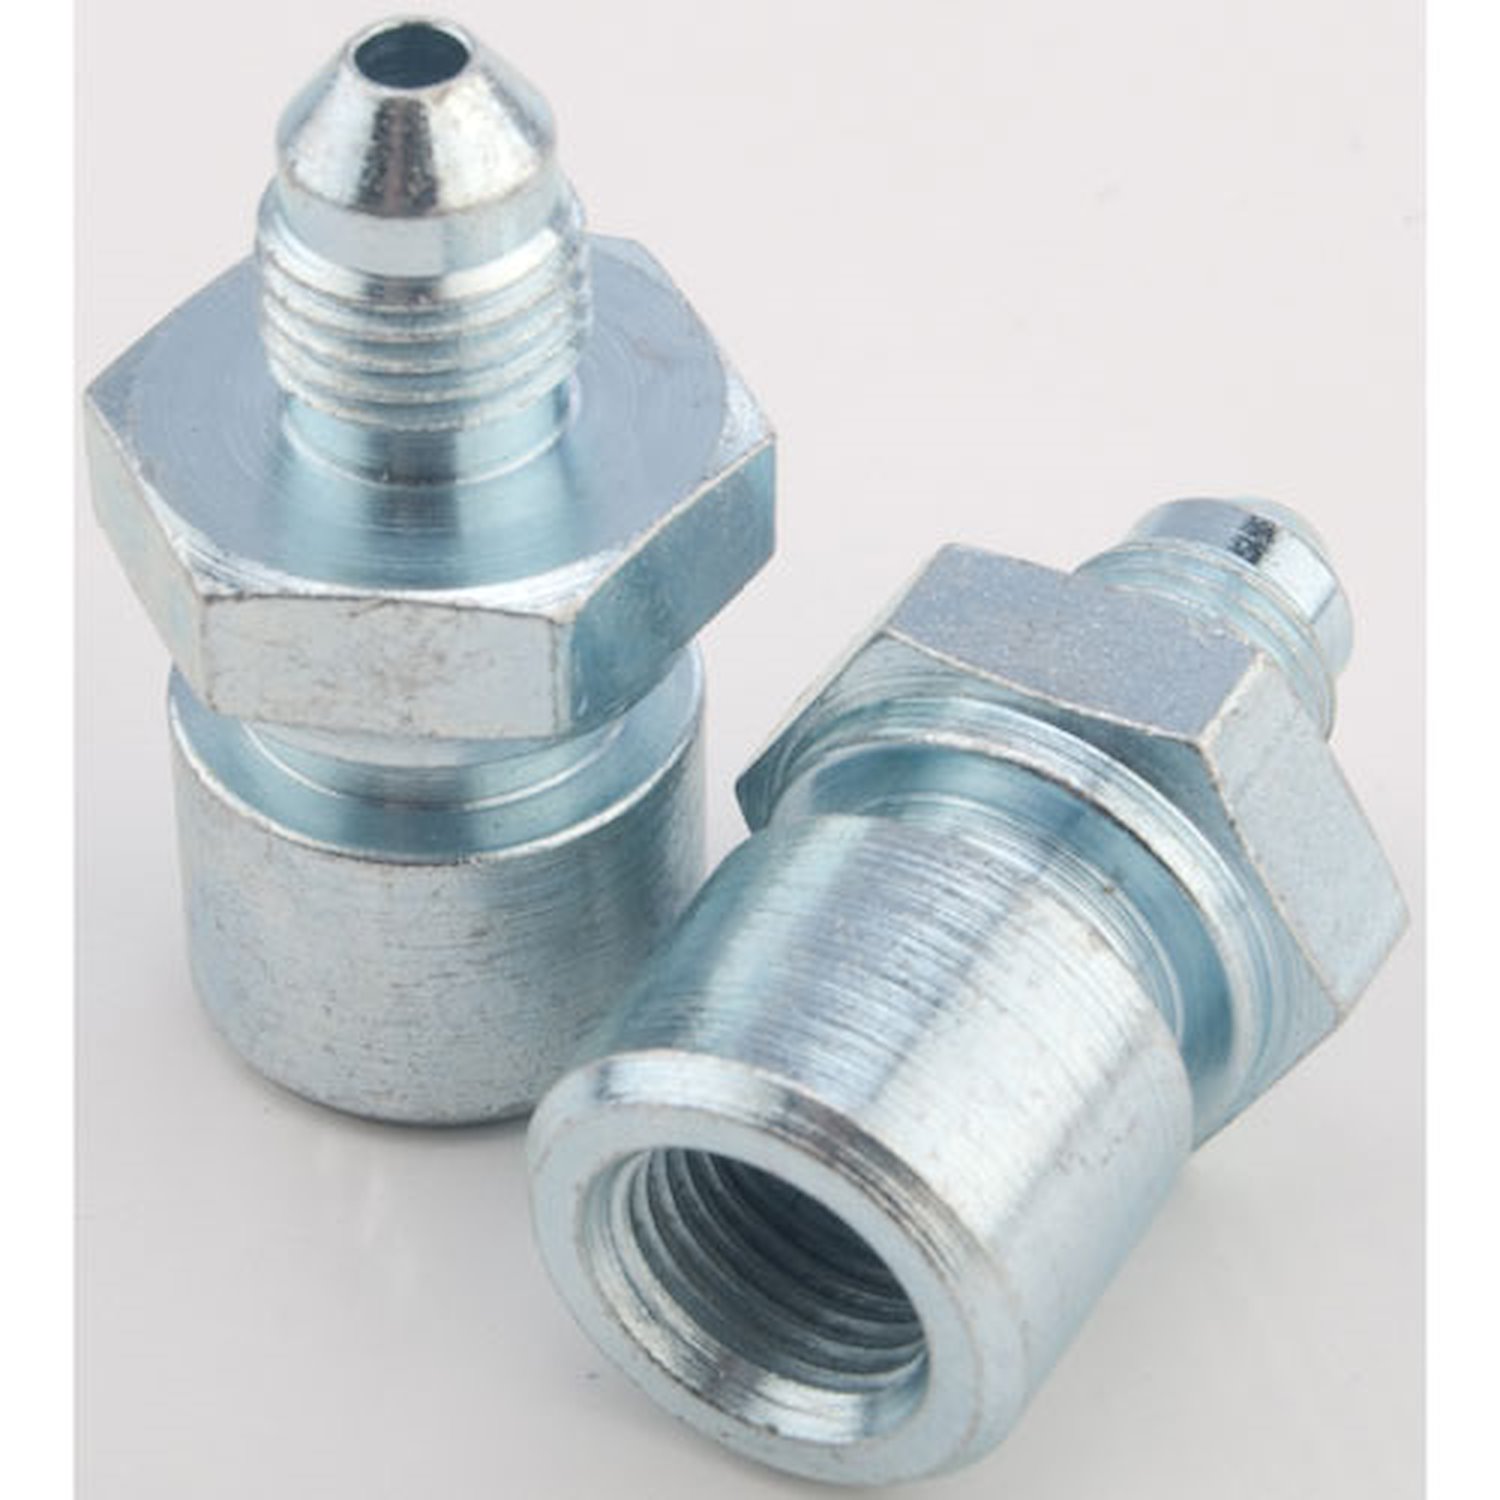 AN to Inverted Flare Female Tube Adapter Fittings [-3 AN Male to 10 mm x 1.0 Female Inverted Flare]